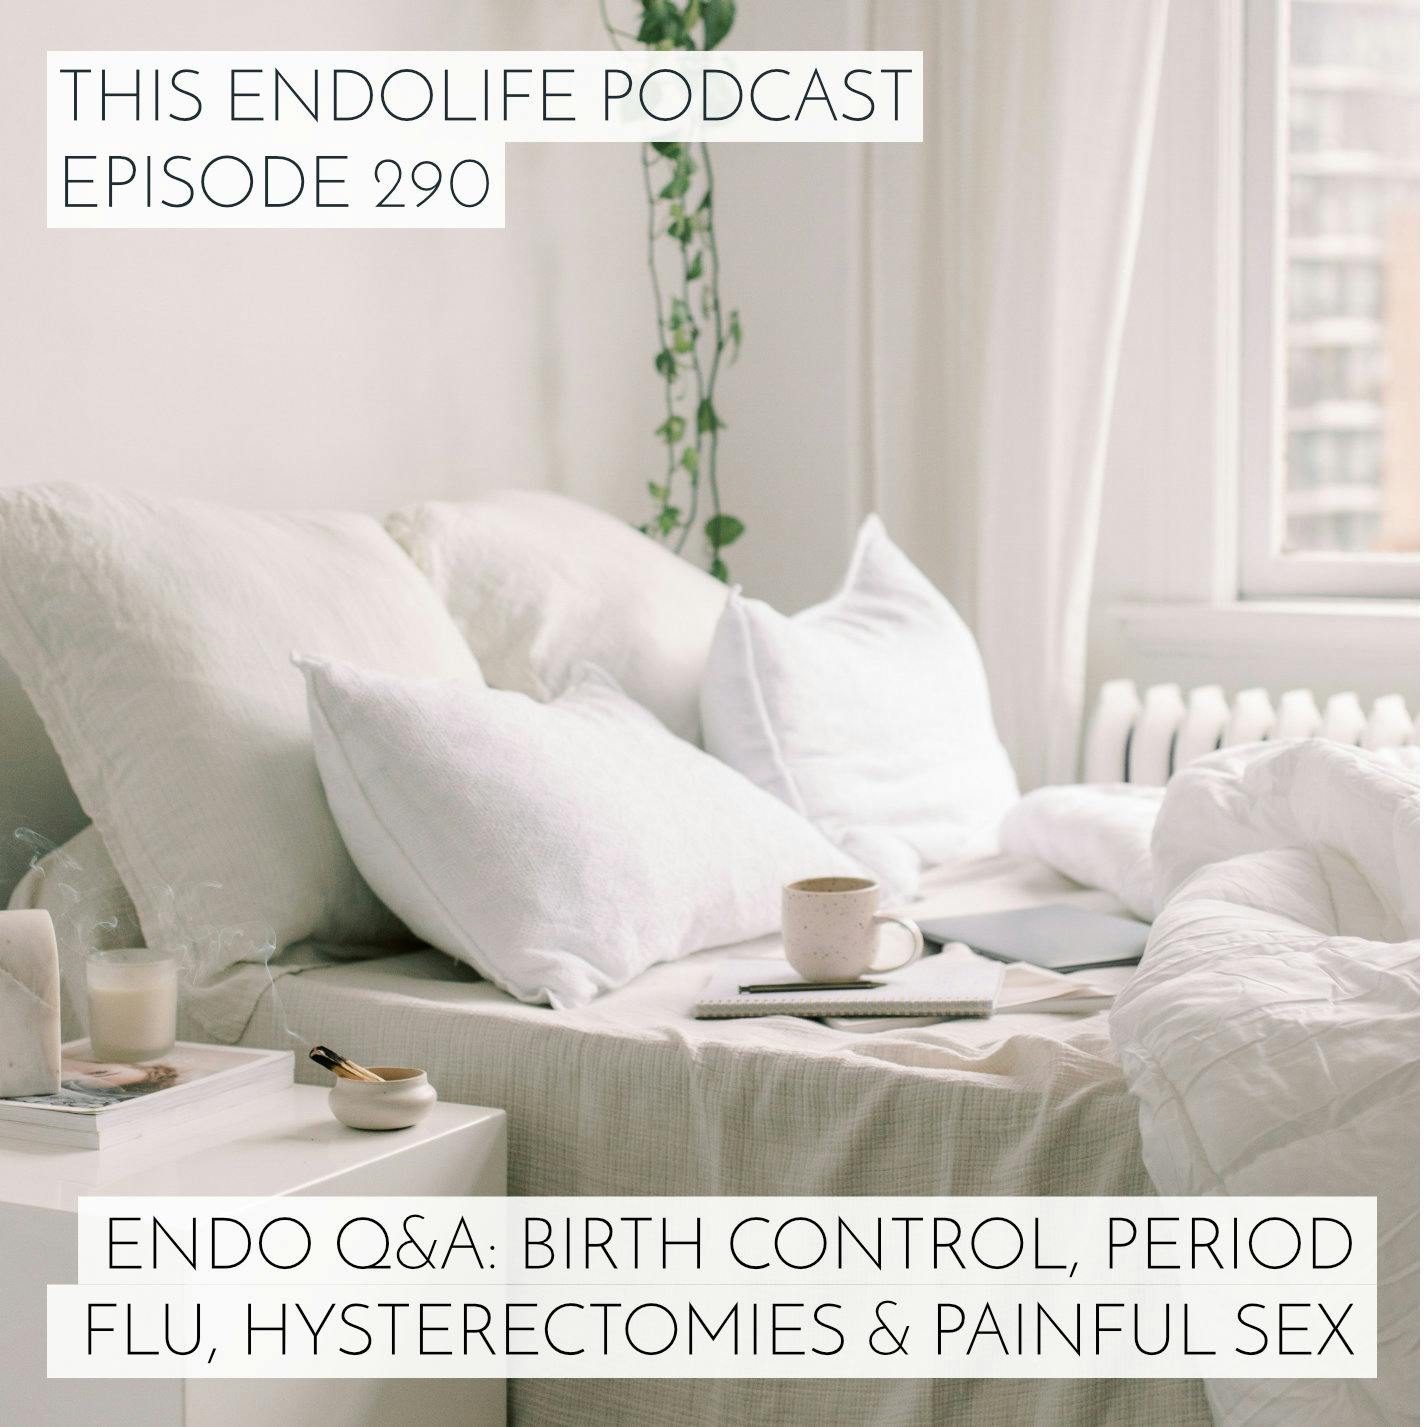 Endo Q&A: Birth Control, Period Flu, Hysterectomies and Painful Sex